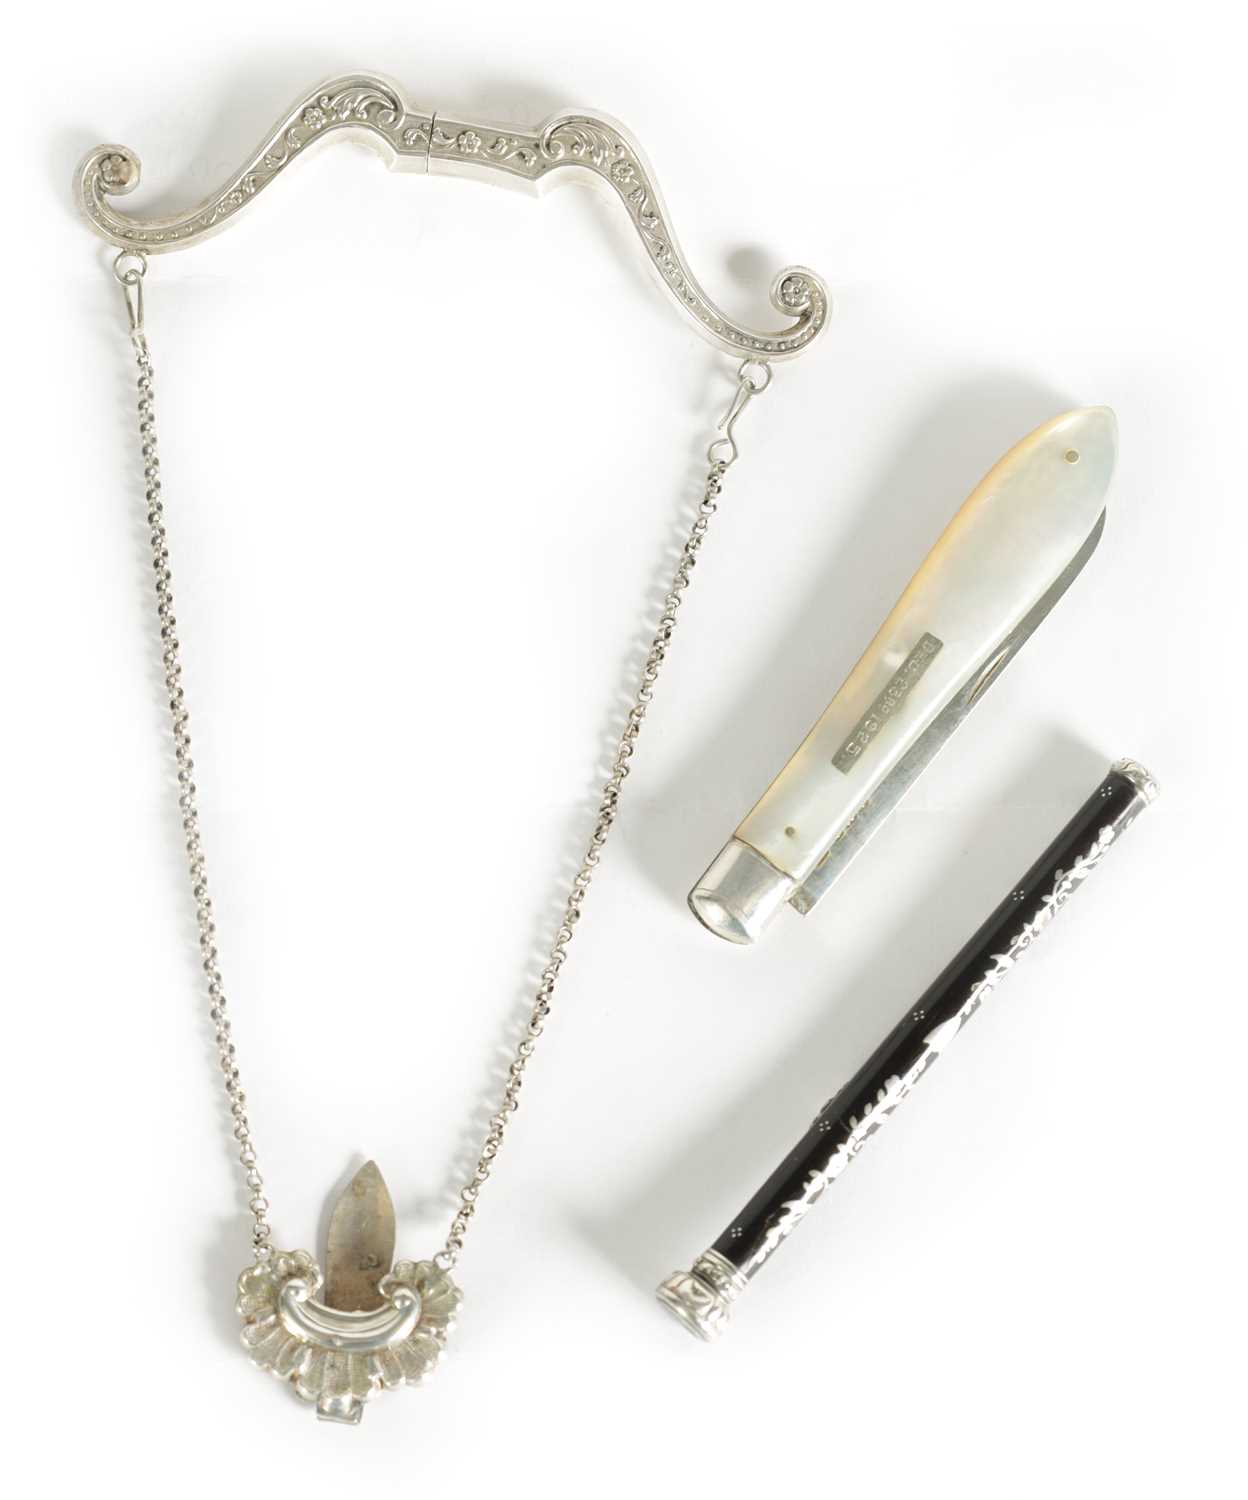 A 19TH CENTURY SILVER AND EBONISED RETRACTABLE PENCIL WITH INLAID PIQUEWORK DECORATION